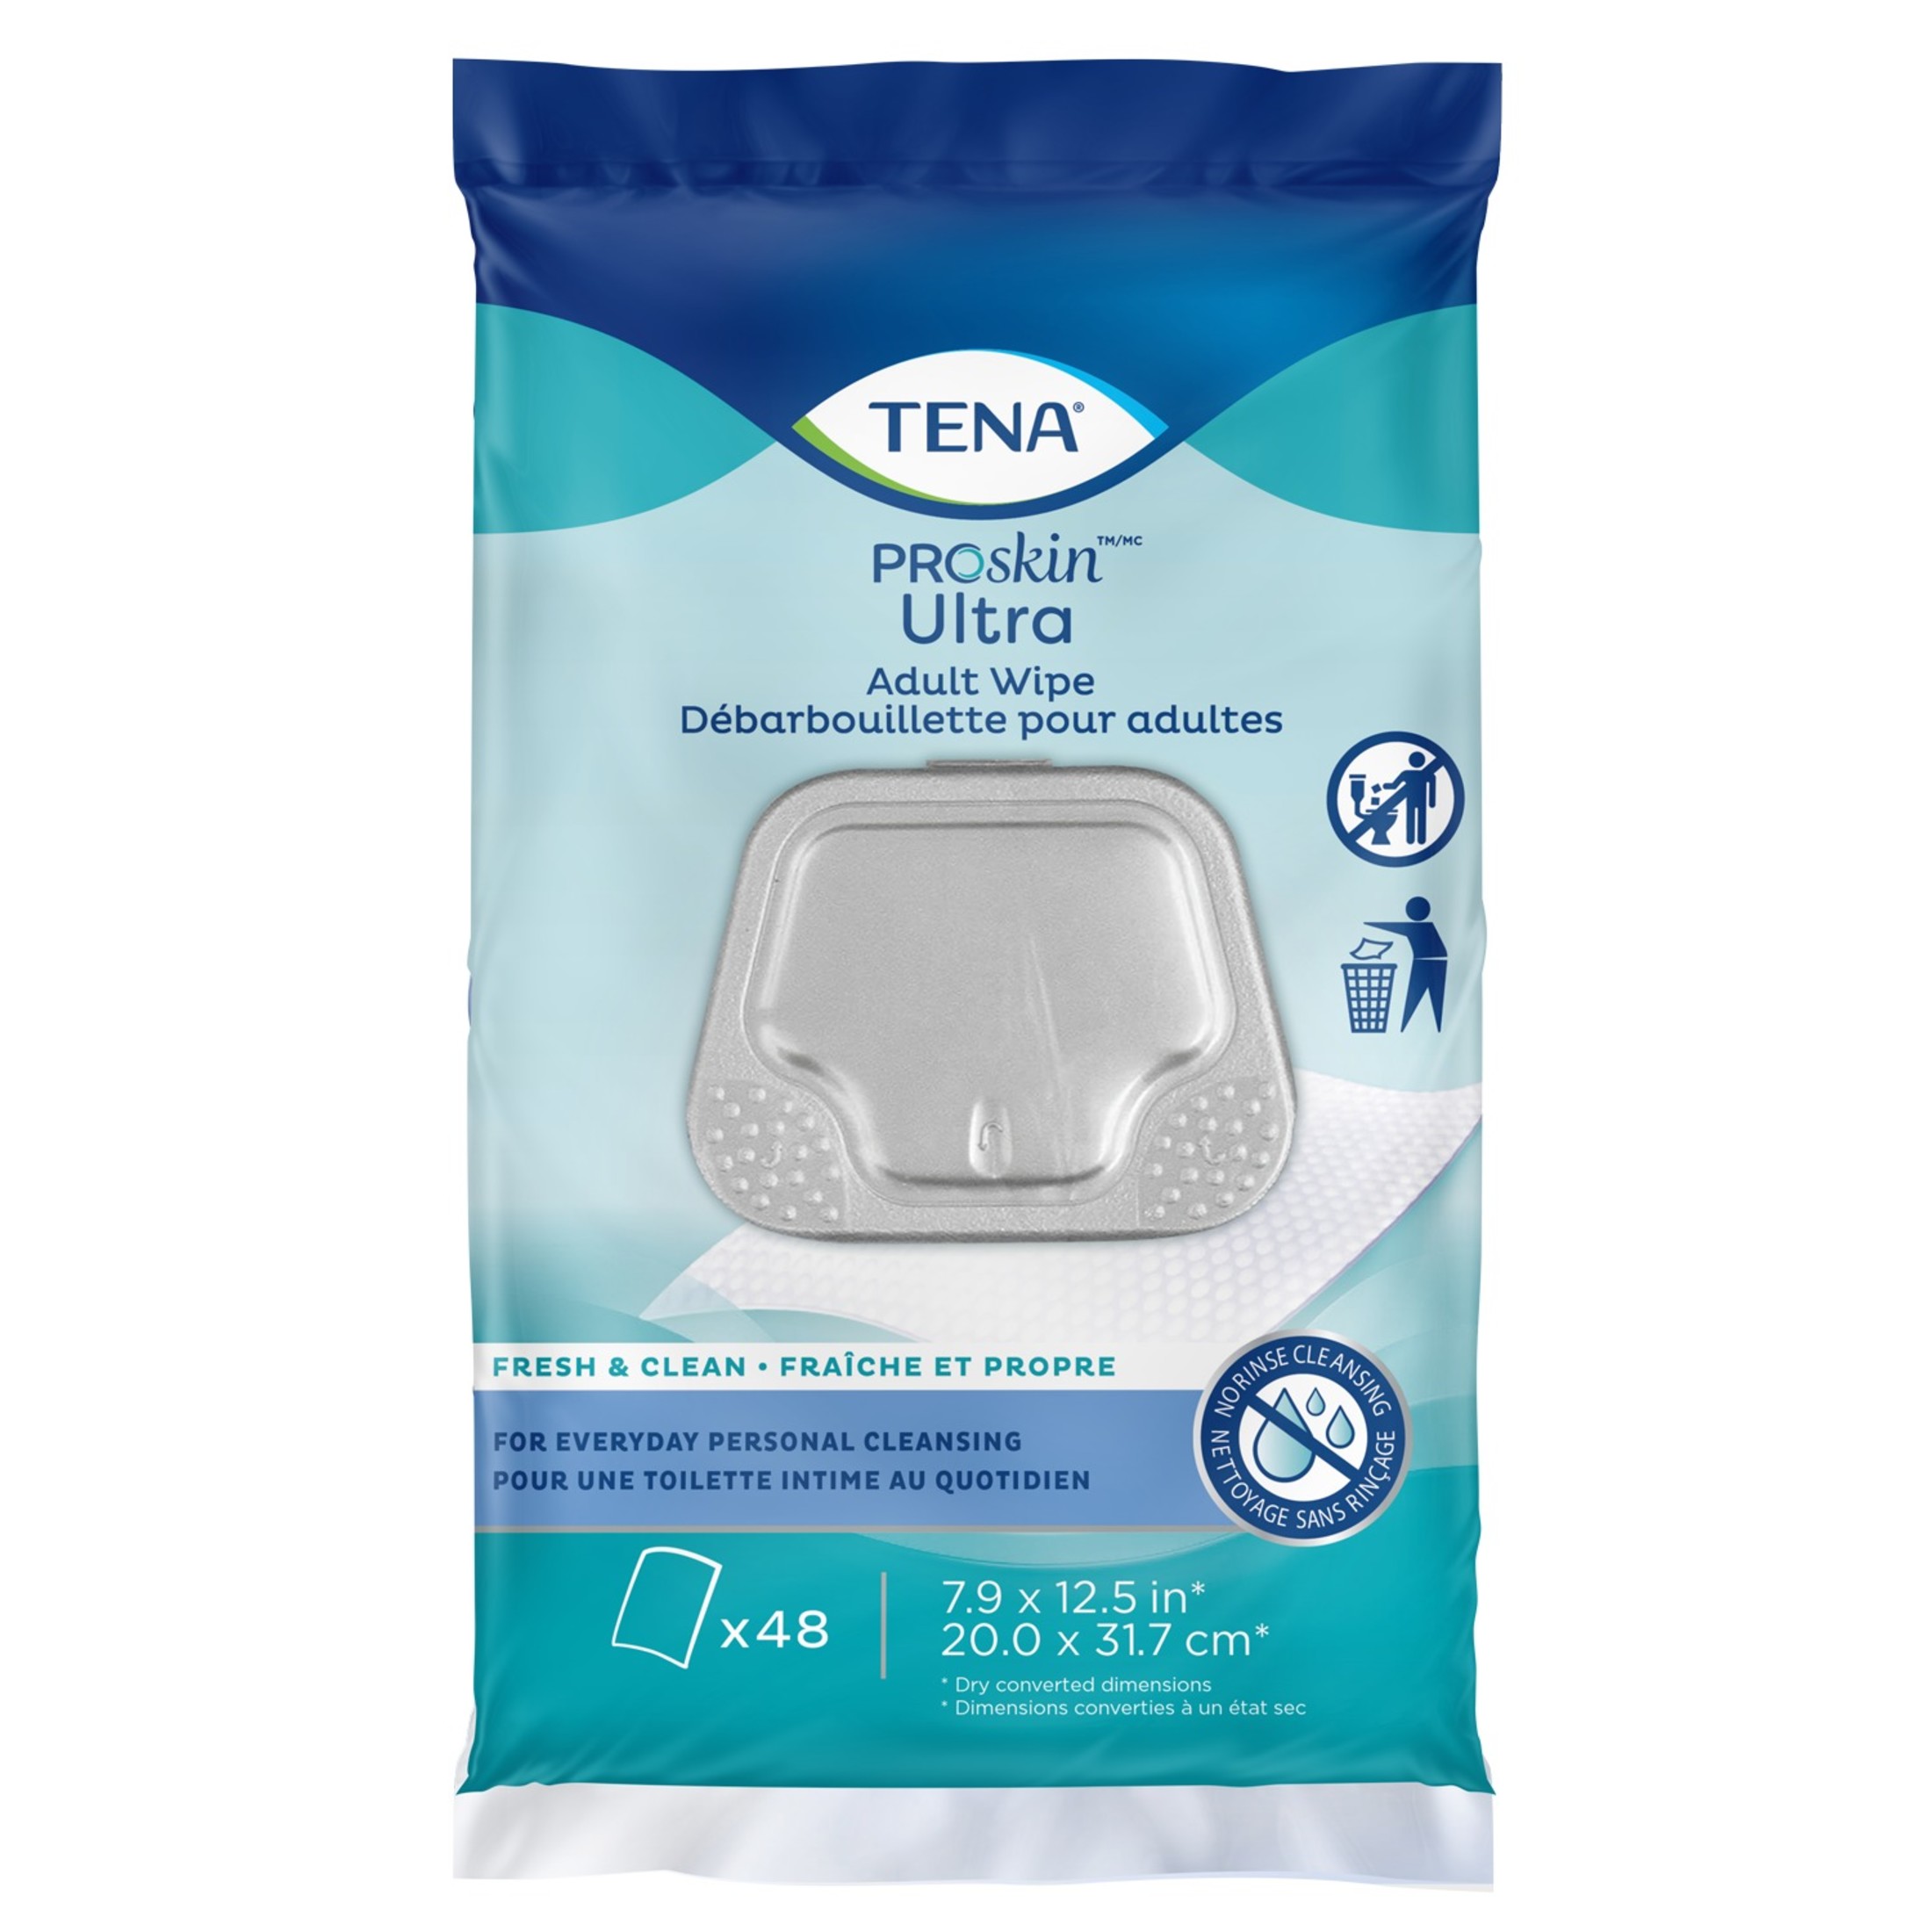 Tena ProSkin Ultra Adult Wipes, 48 Ct - image 2 of 8